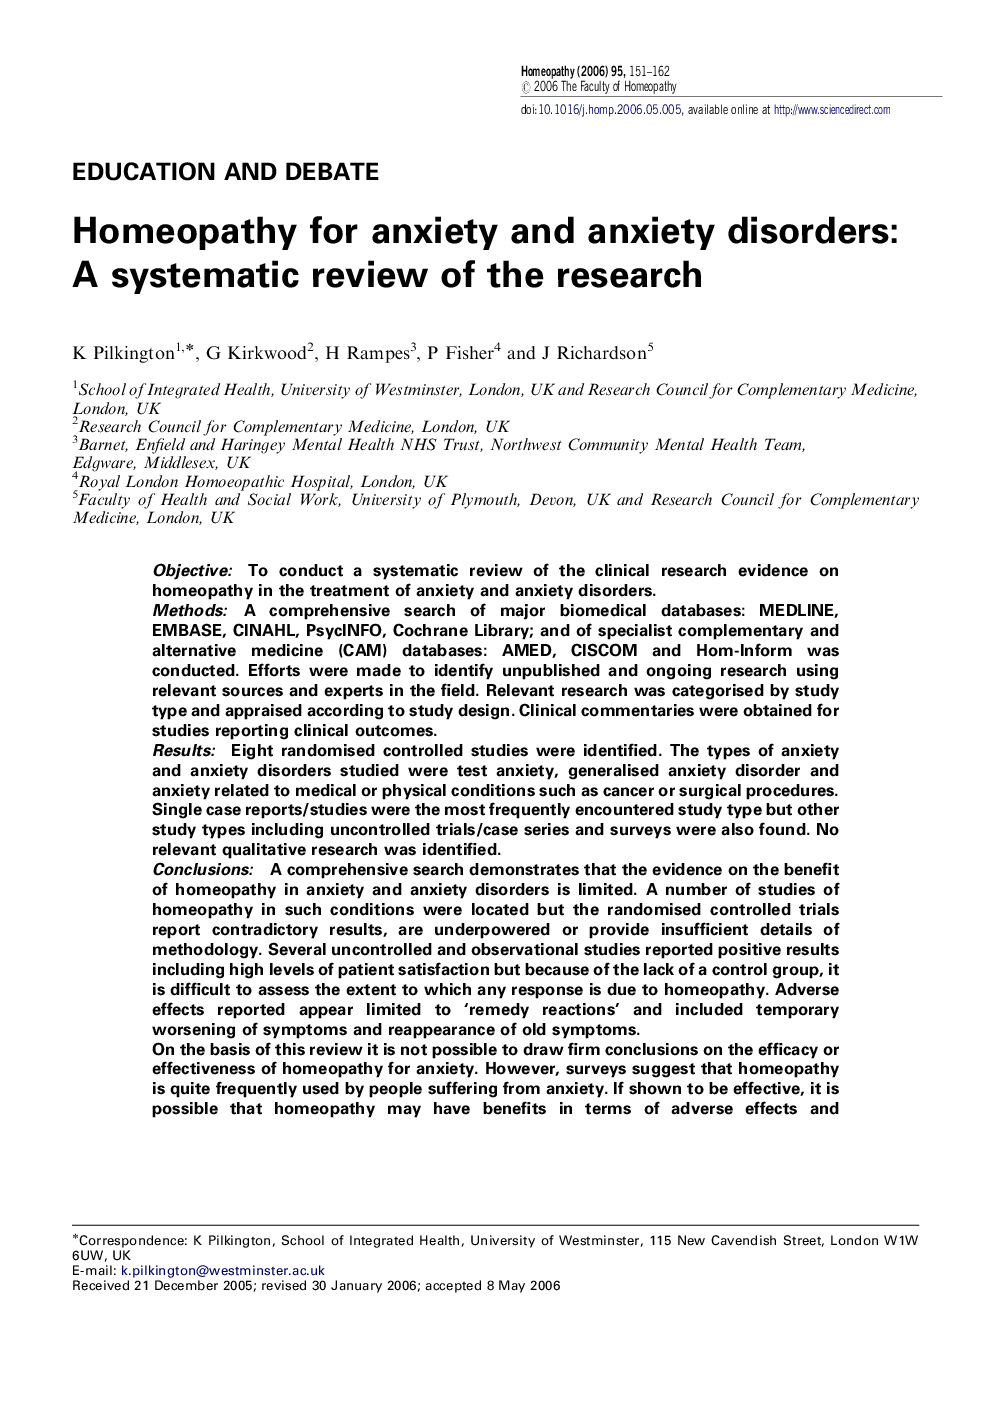 Homeopathy for anxiety and anxiety disorders: A systematic review of the research